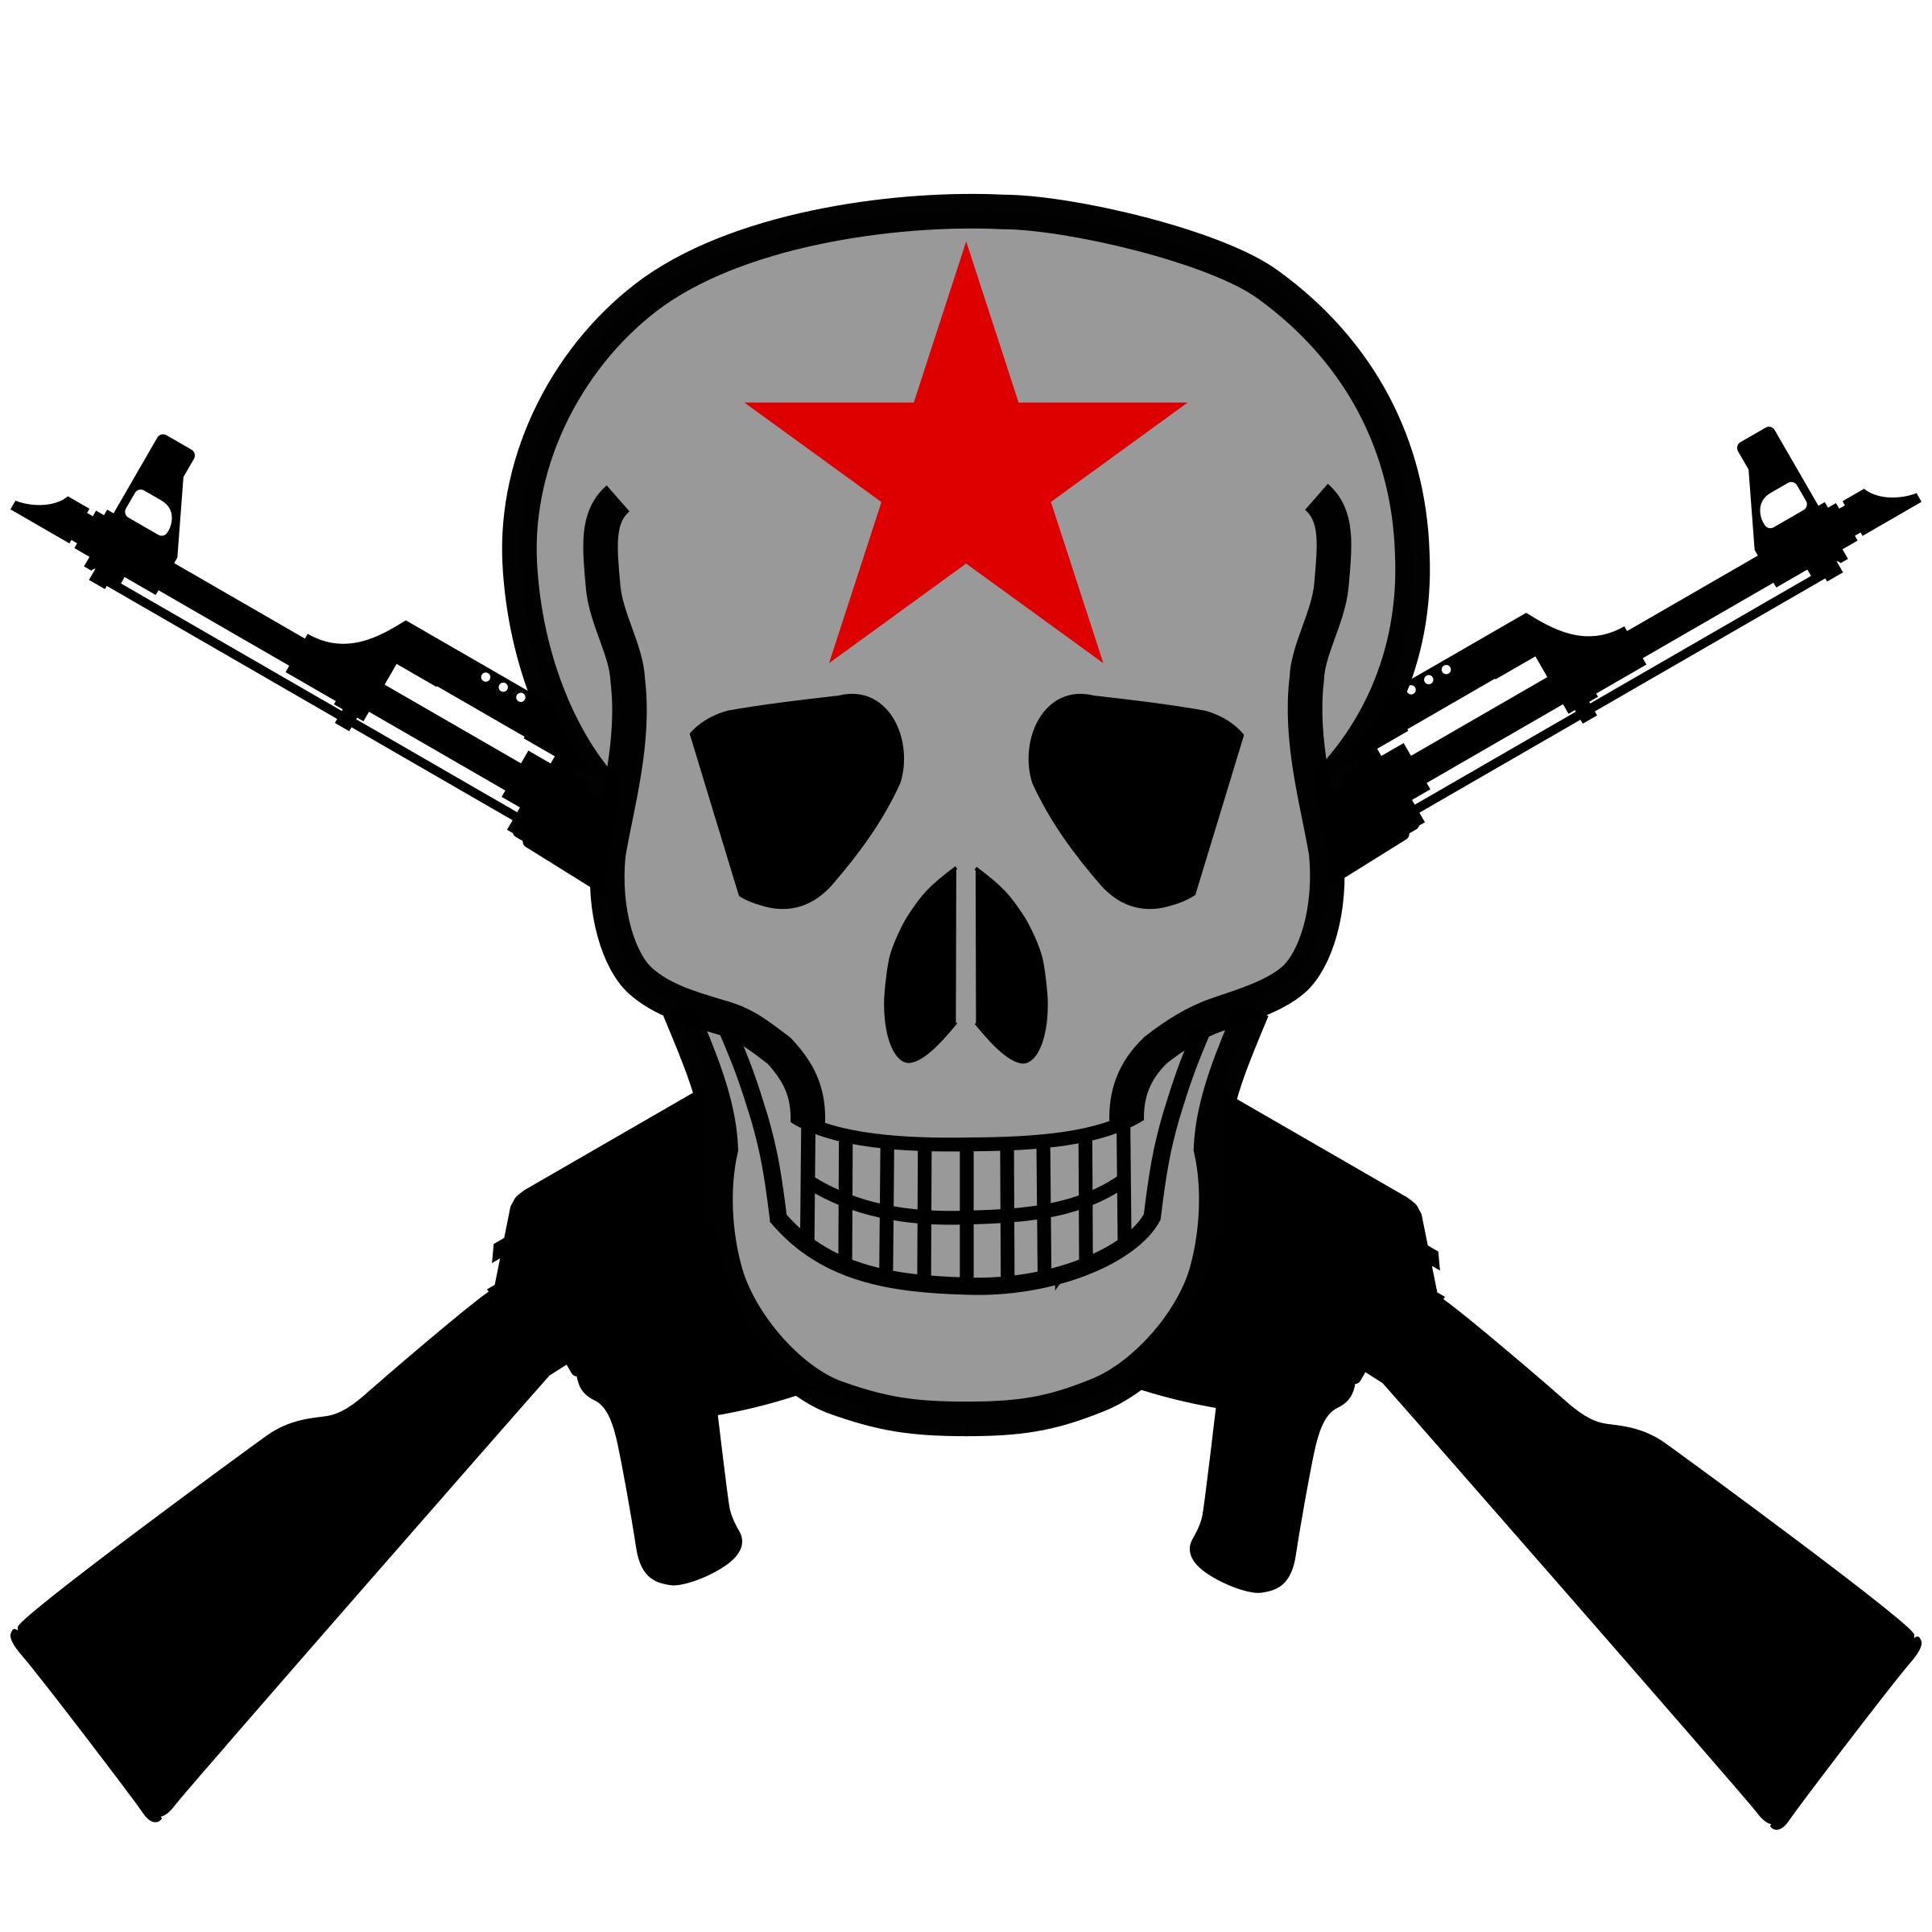 Skull and crossed guns 2 PNG icons